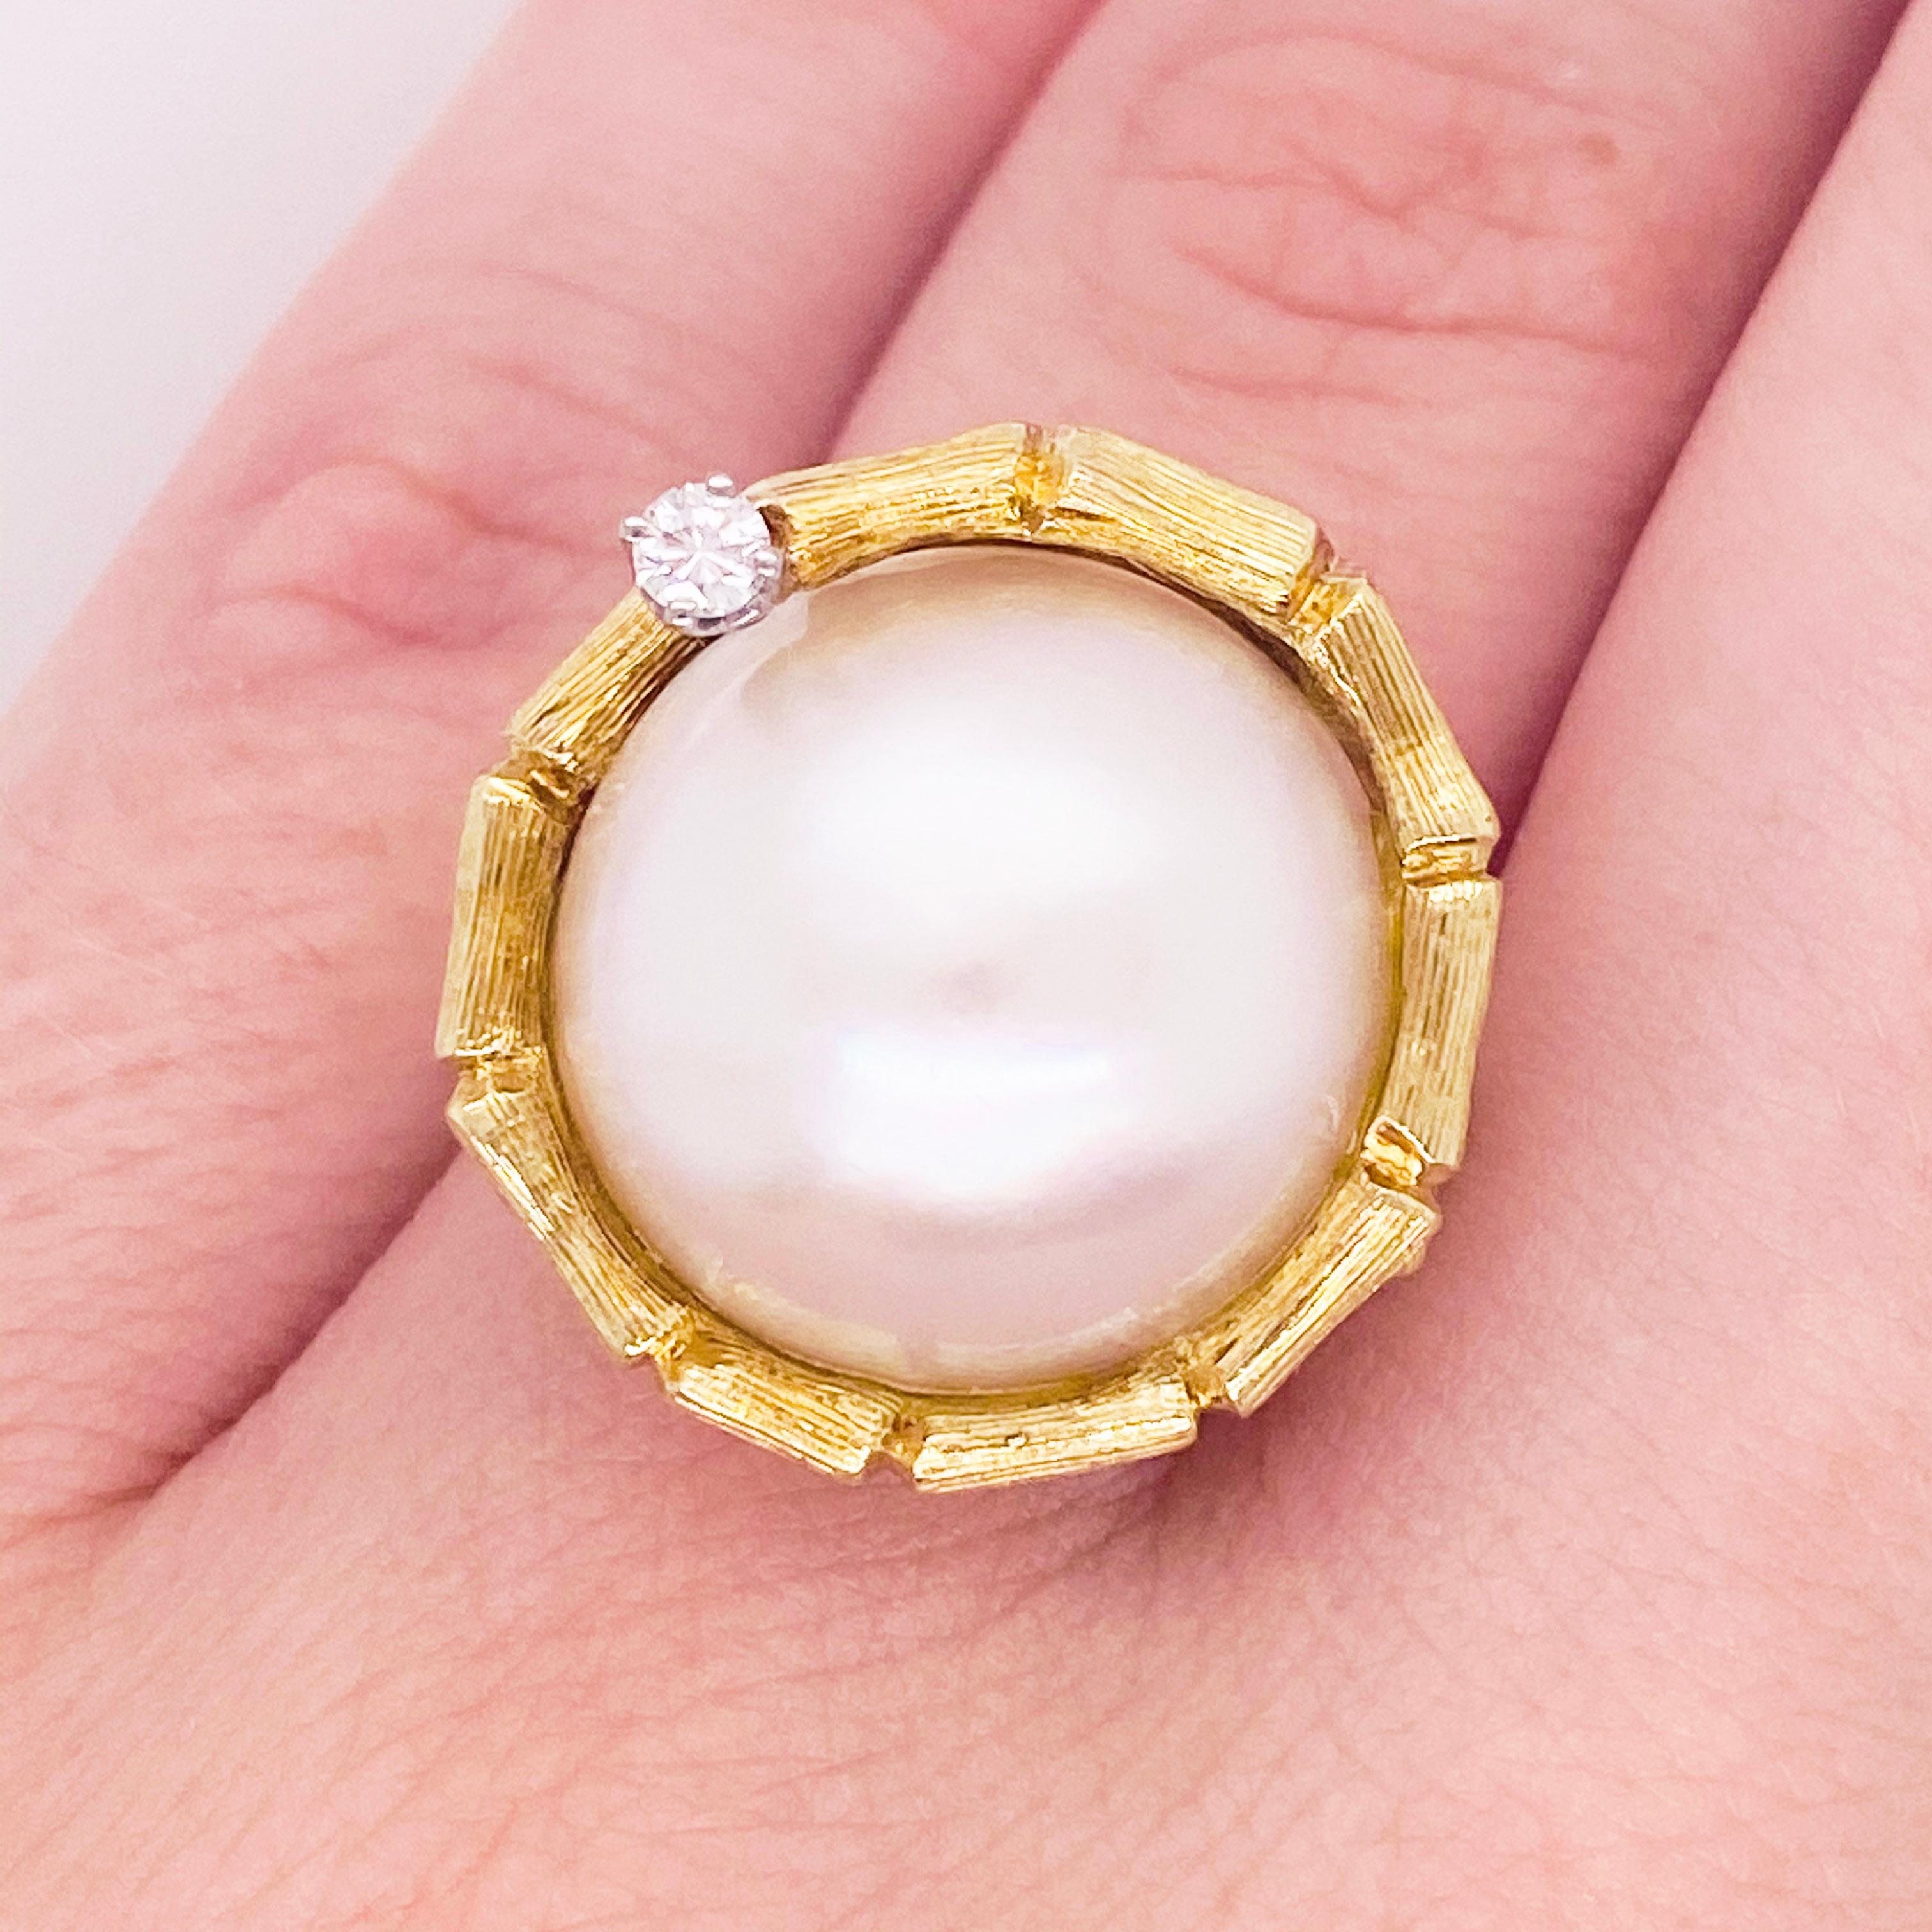 This luxurious ring would make the perfect gift for your loved one or yourself! This large pearl delicately encircled in 18 karat gold and accented with a round white diamond is quite a stunner. It's very classy and elegant while also acting as a